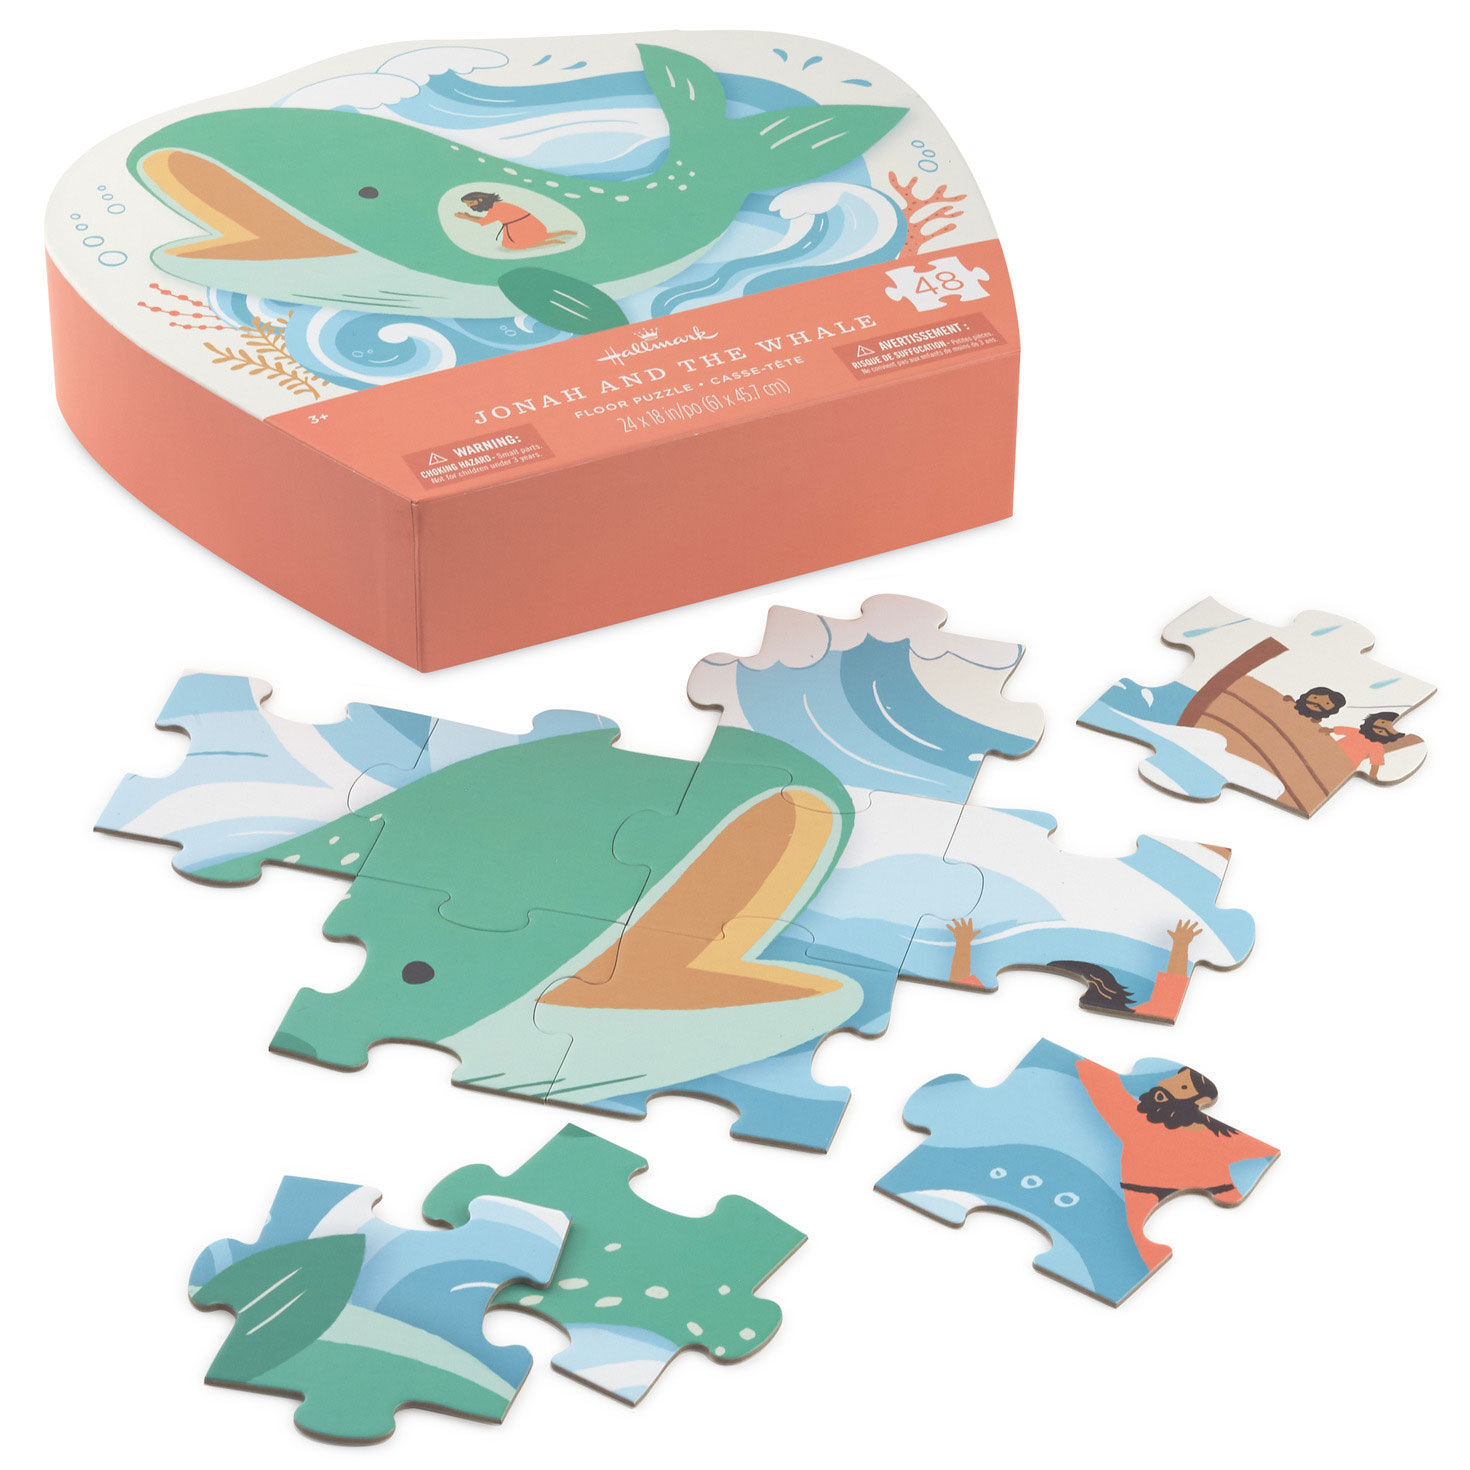 Jonah and the Whale 48-Piece Floor Puzzle for only USD 19.99 | Hallmark